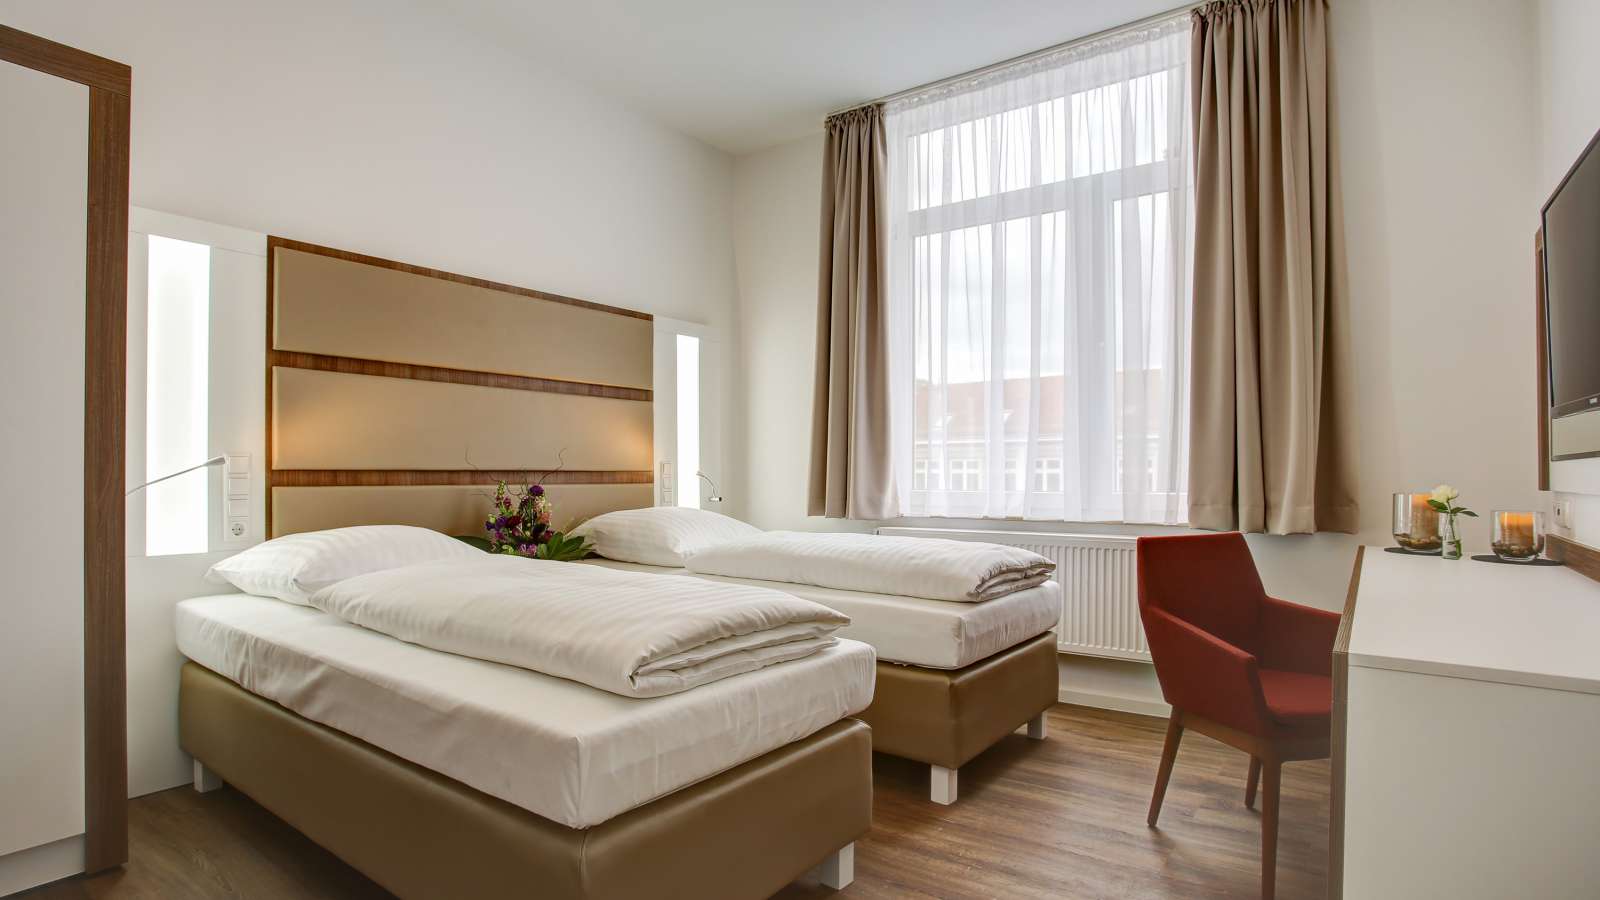 A double room with separate beds in the centre of Hanover